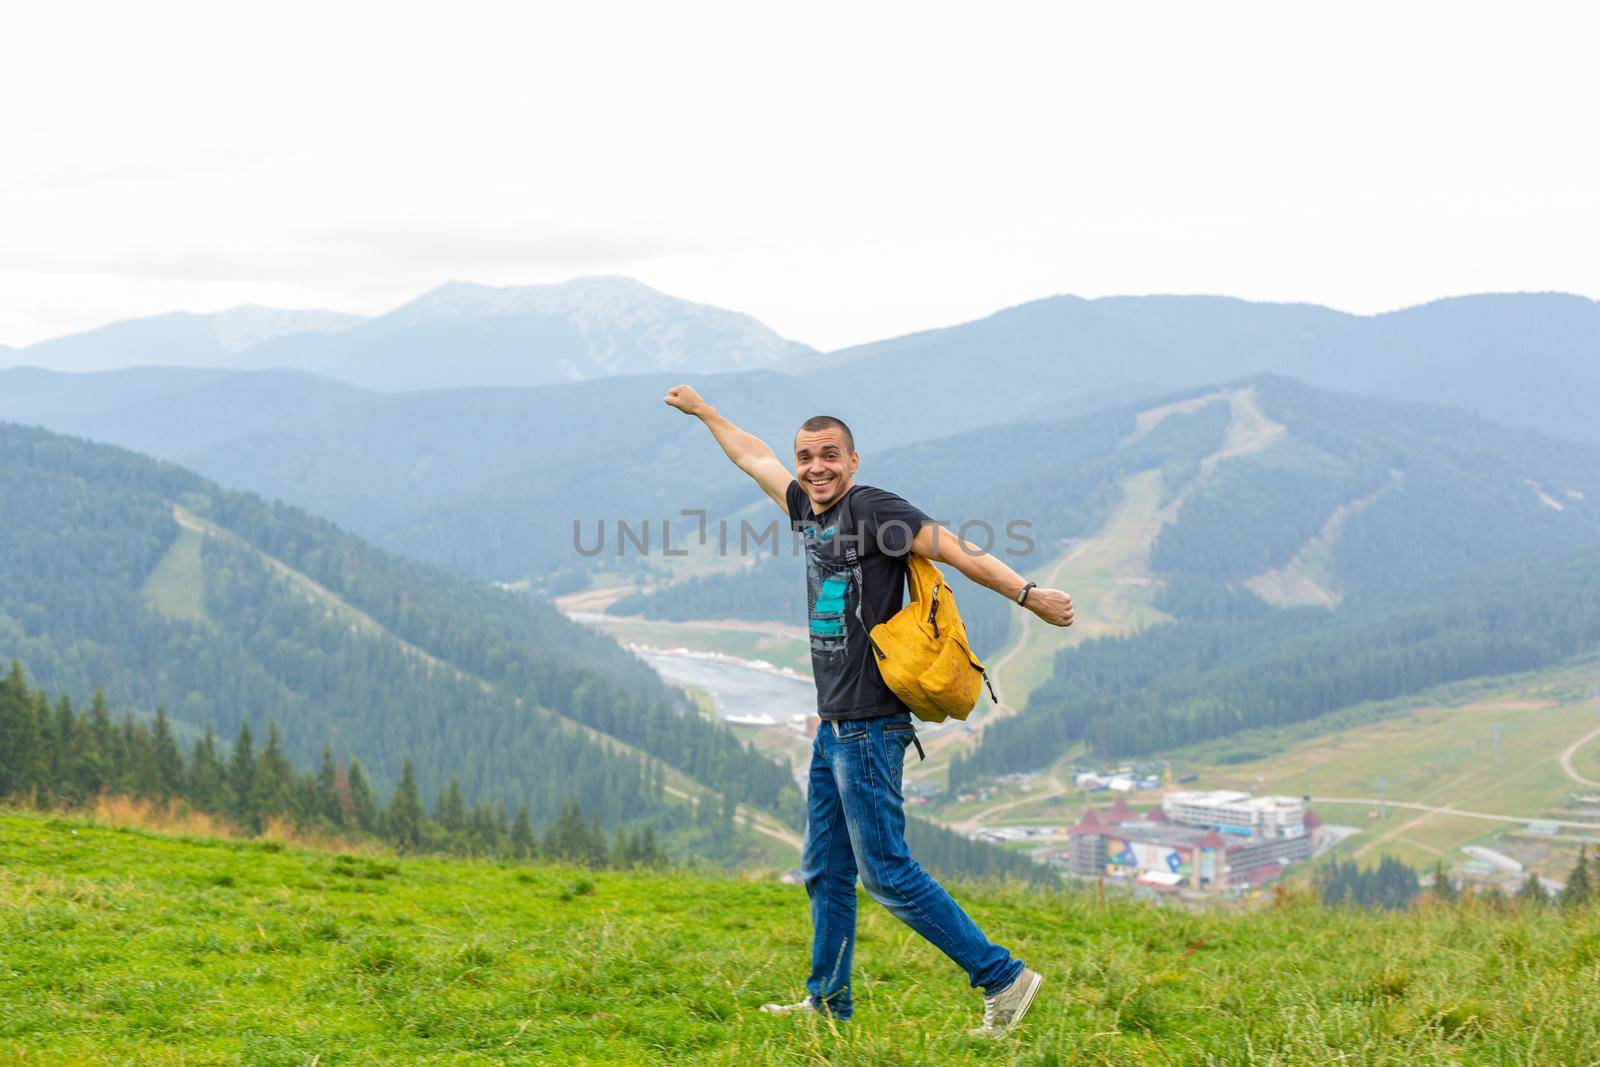 A guy travels with a yellow backpack through picturesque places with beautiful mountain landscapes.